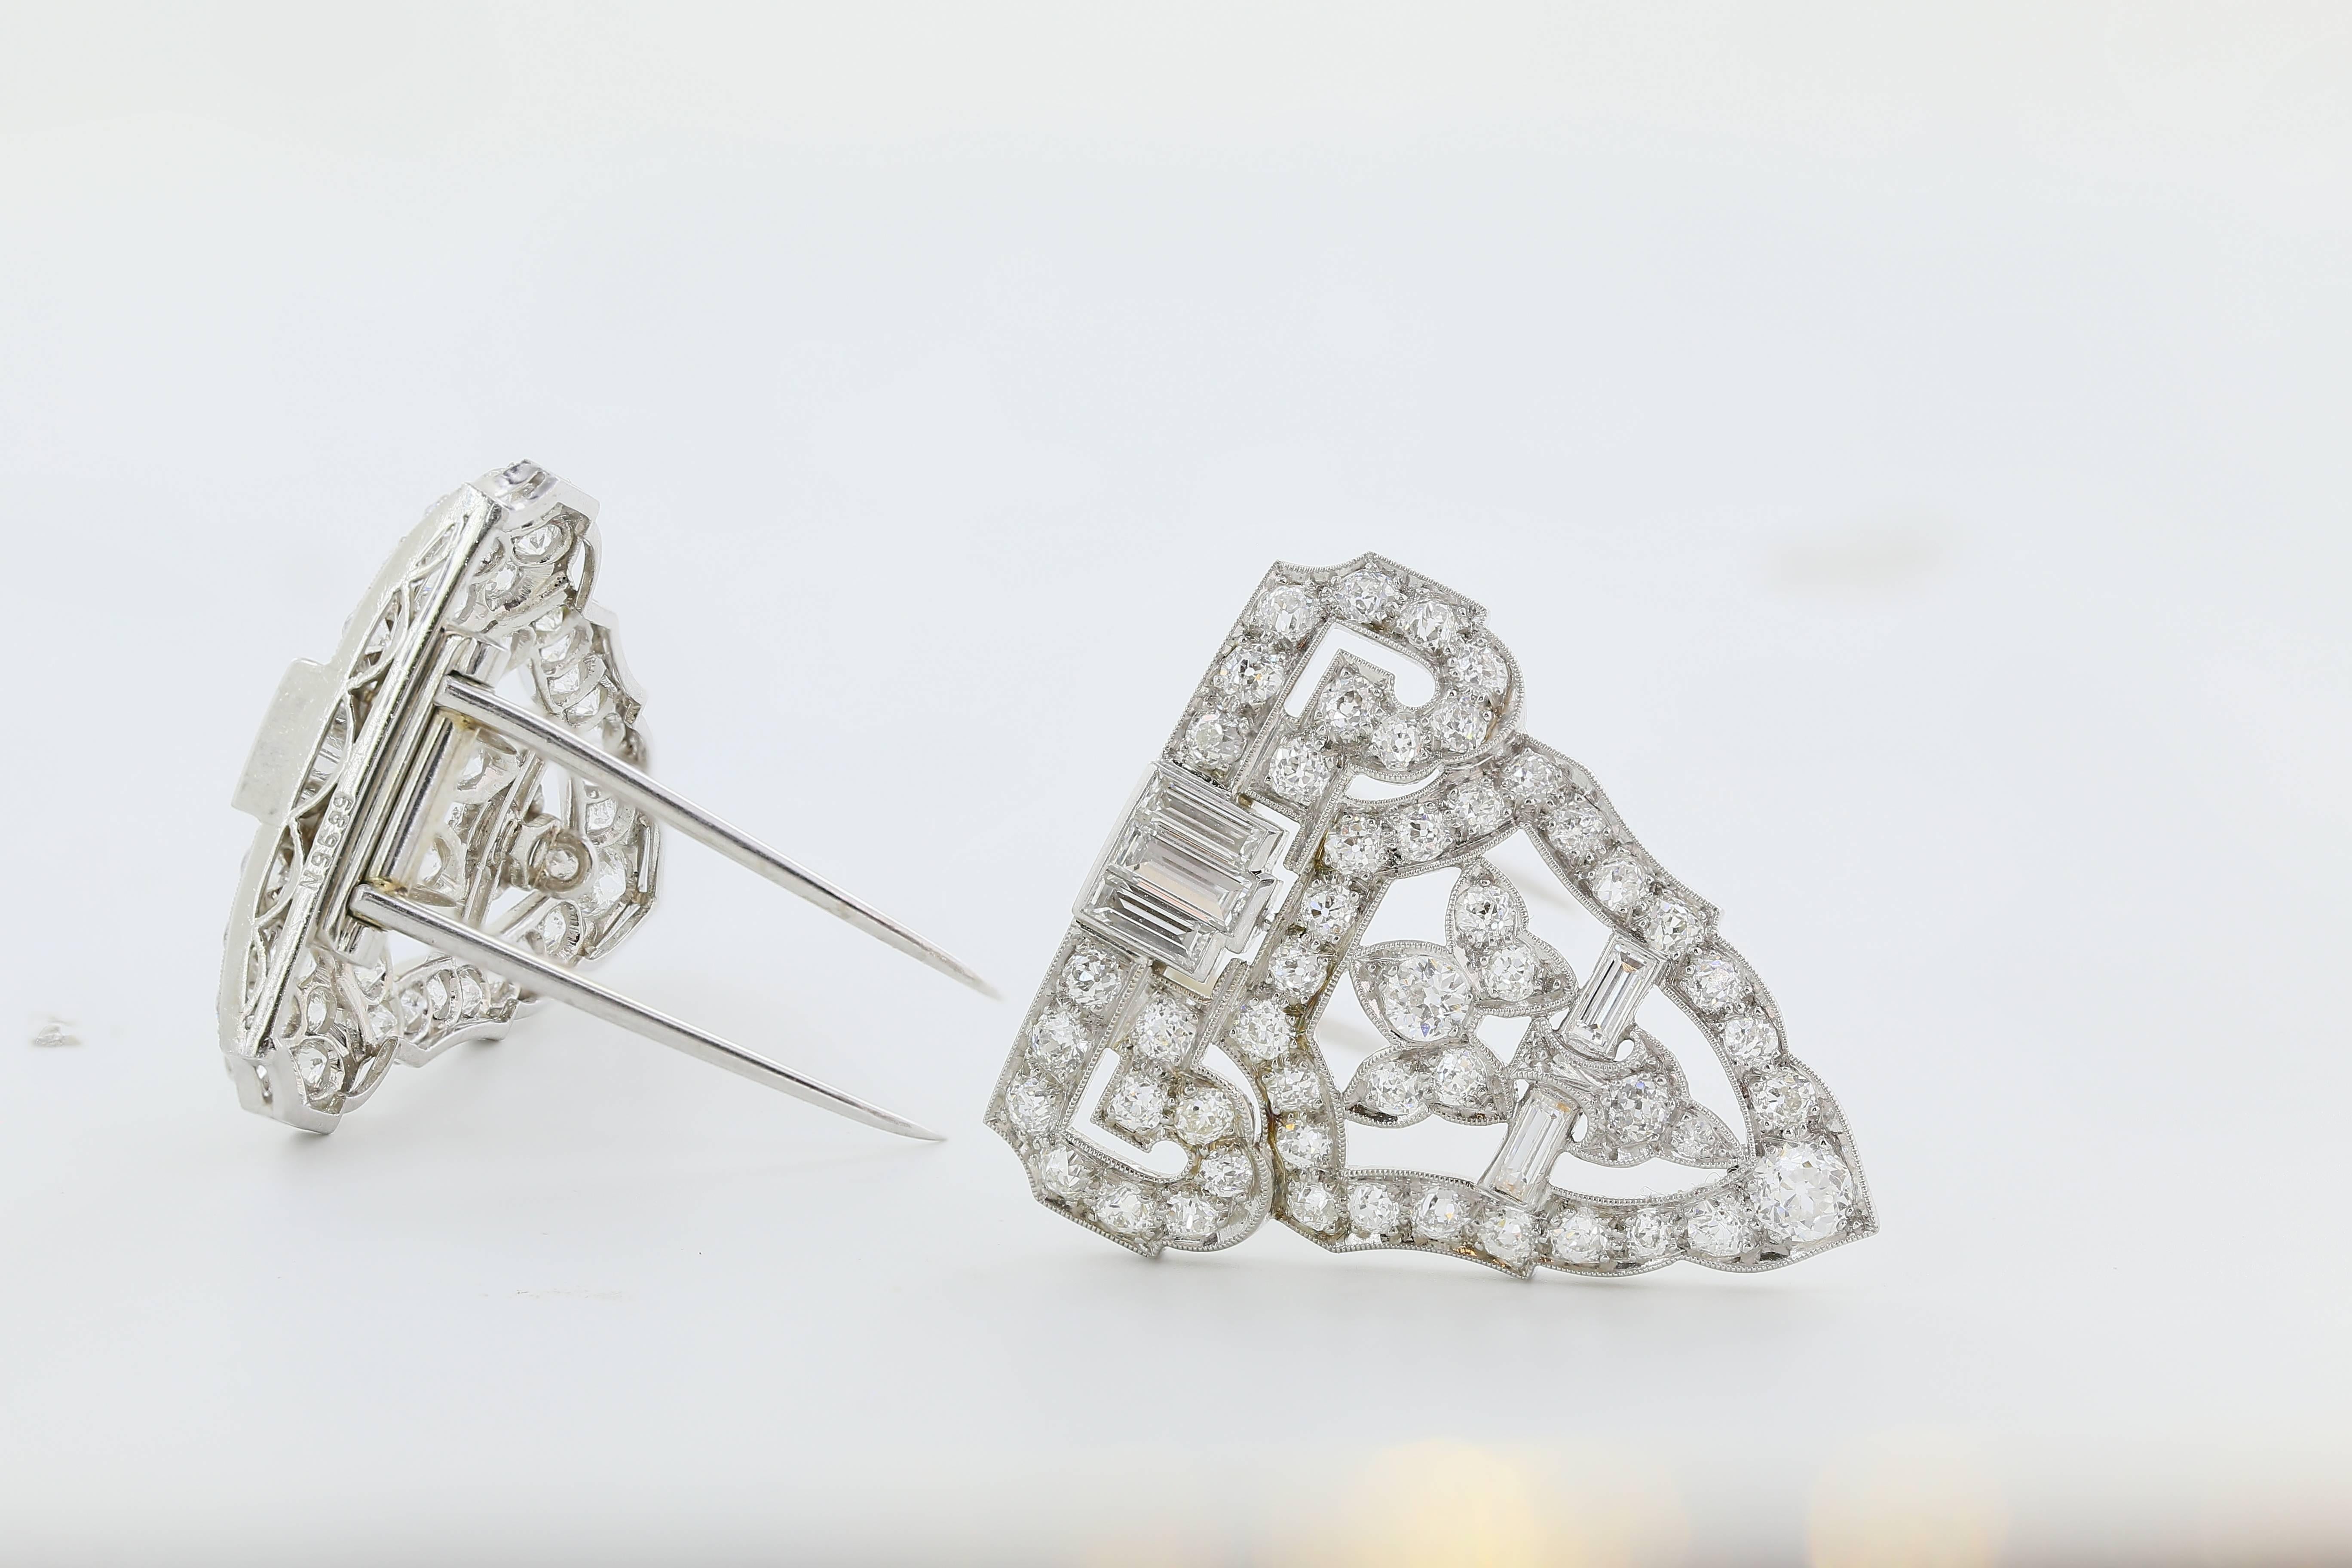 Platinum Art Deco diamond clips/pin consisting of 110 old mine cut and baguette cut diamonds having an approximate total weight of 10.50cts. Circa 1920.